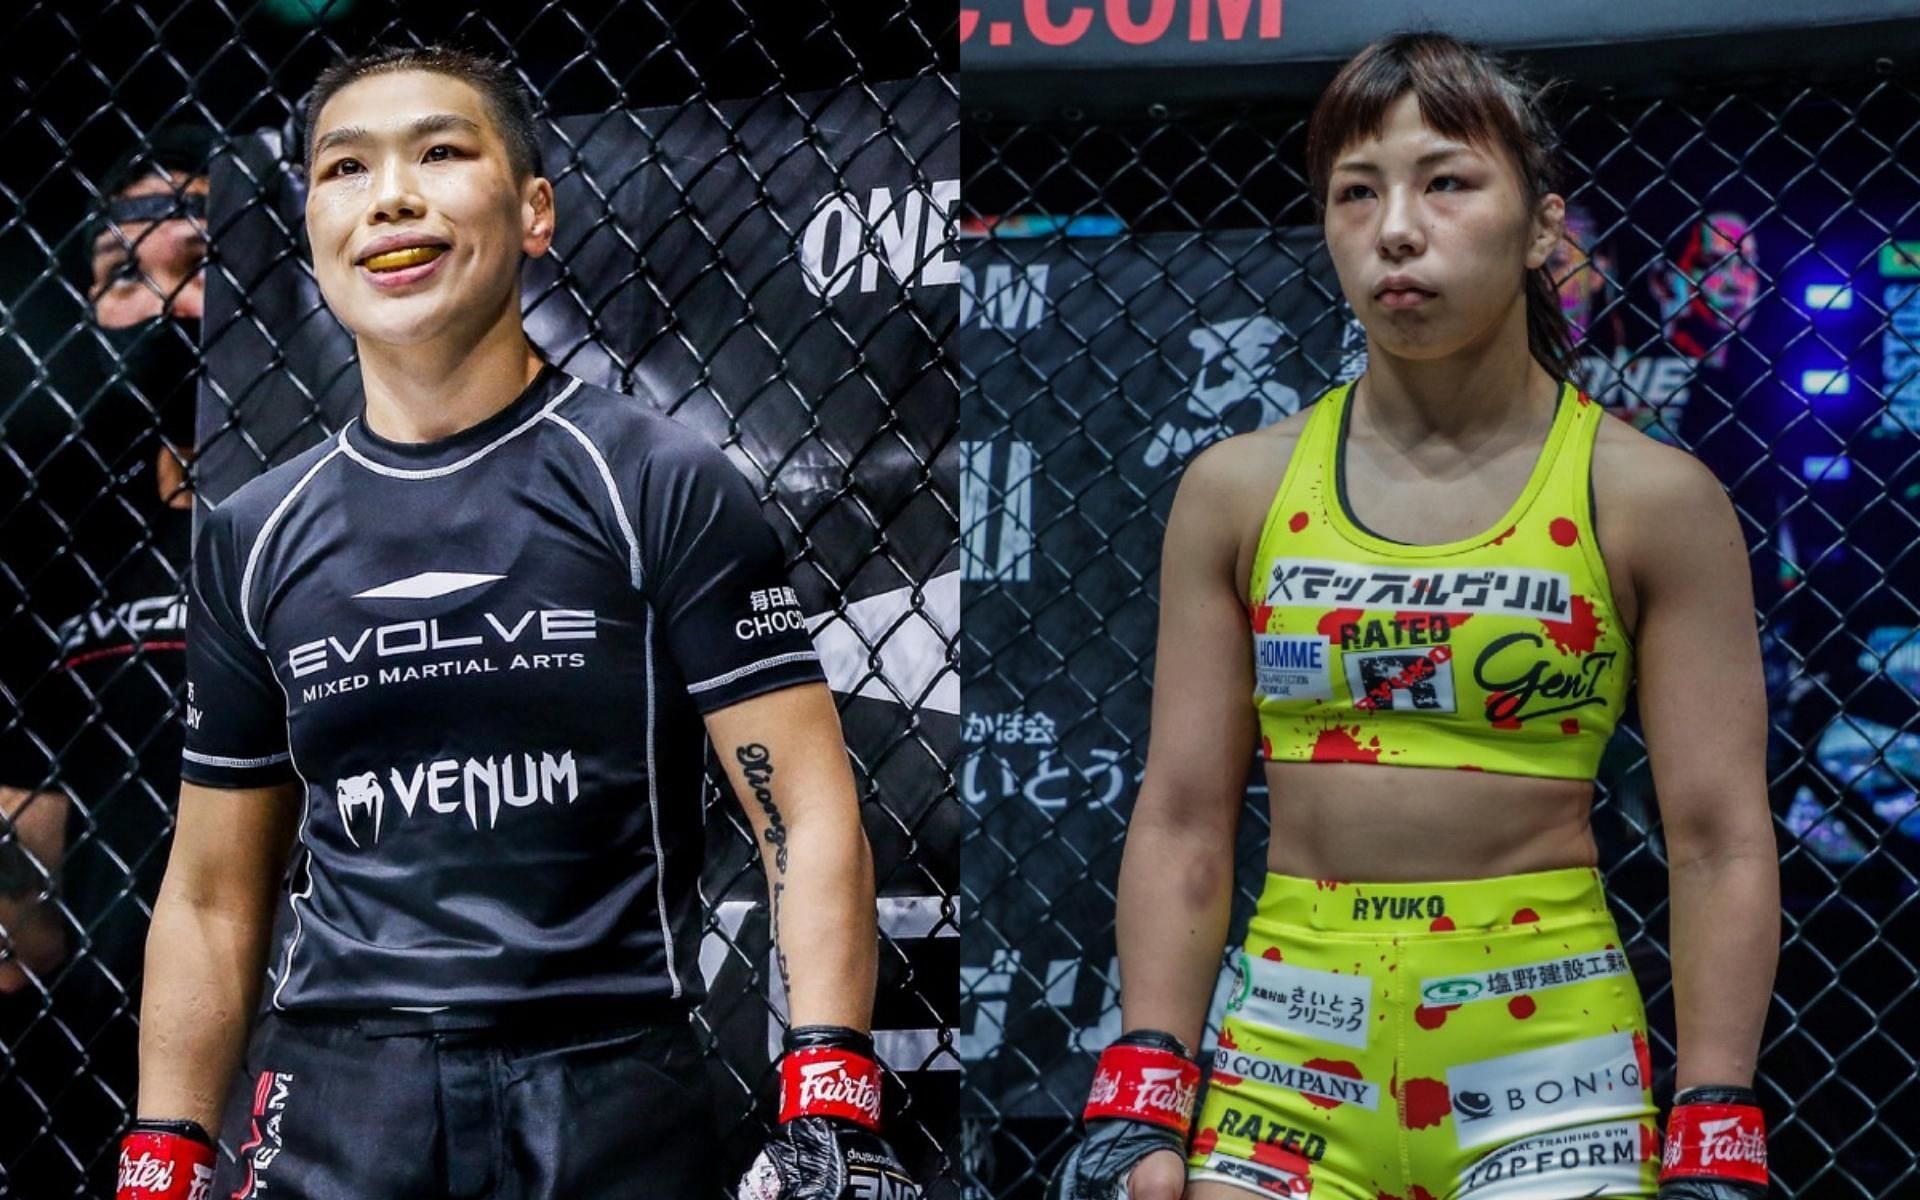 The next ONE Championship event will feature ONE strawweight world champion Xiong Jingnan defend her belt against Japanese submission ace Ayaka Miura. (Images courtesy of ONE Championship)